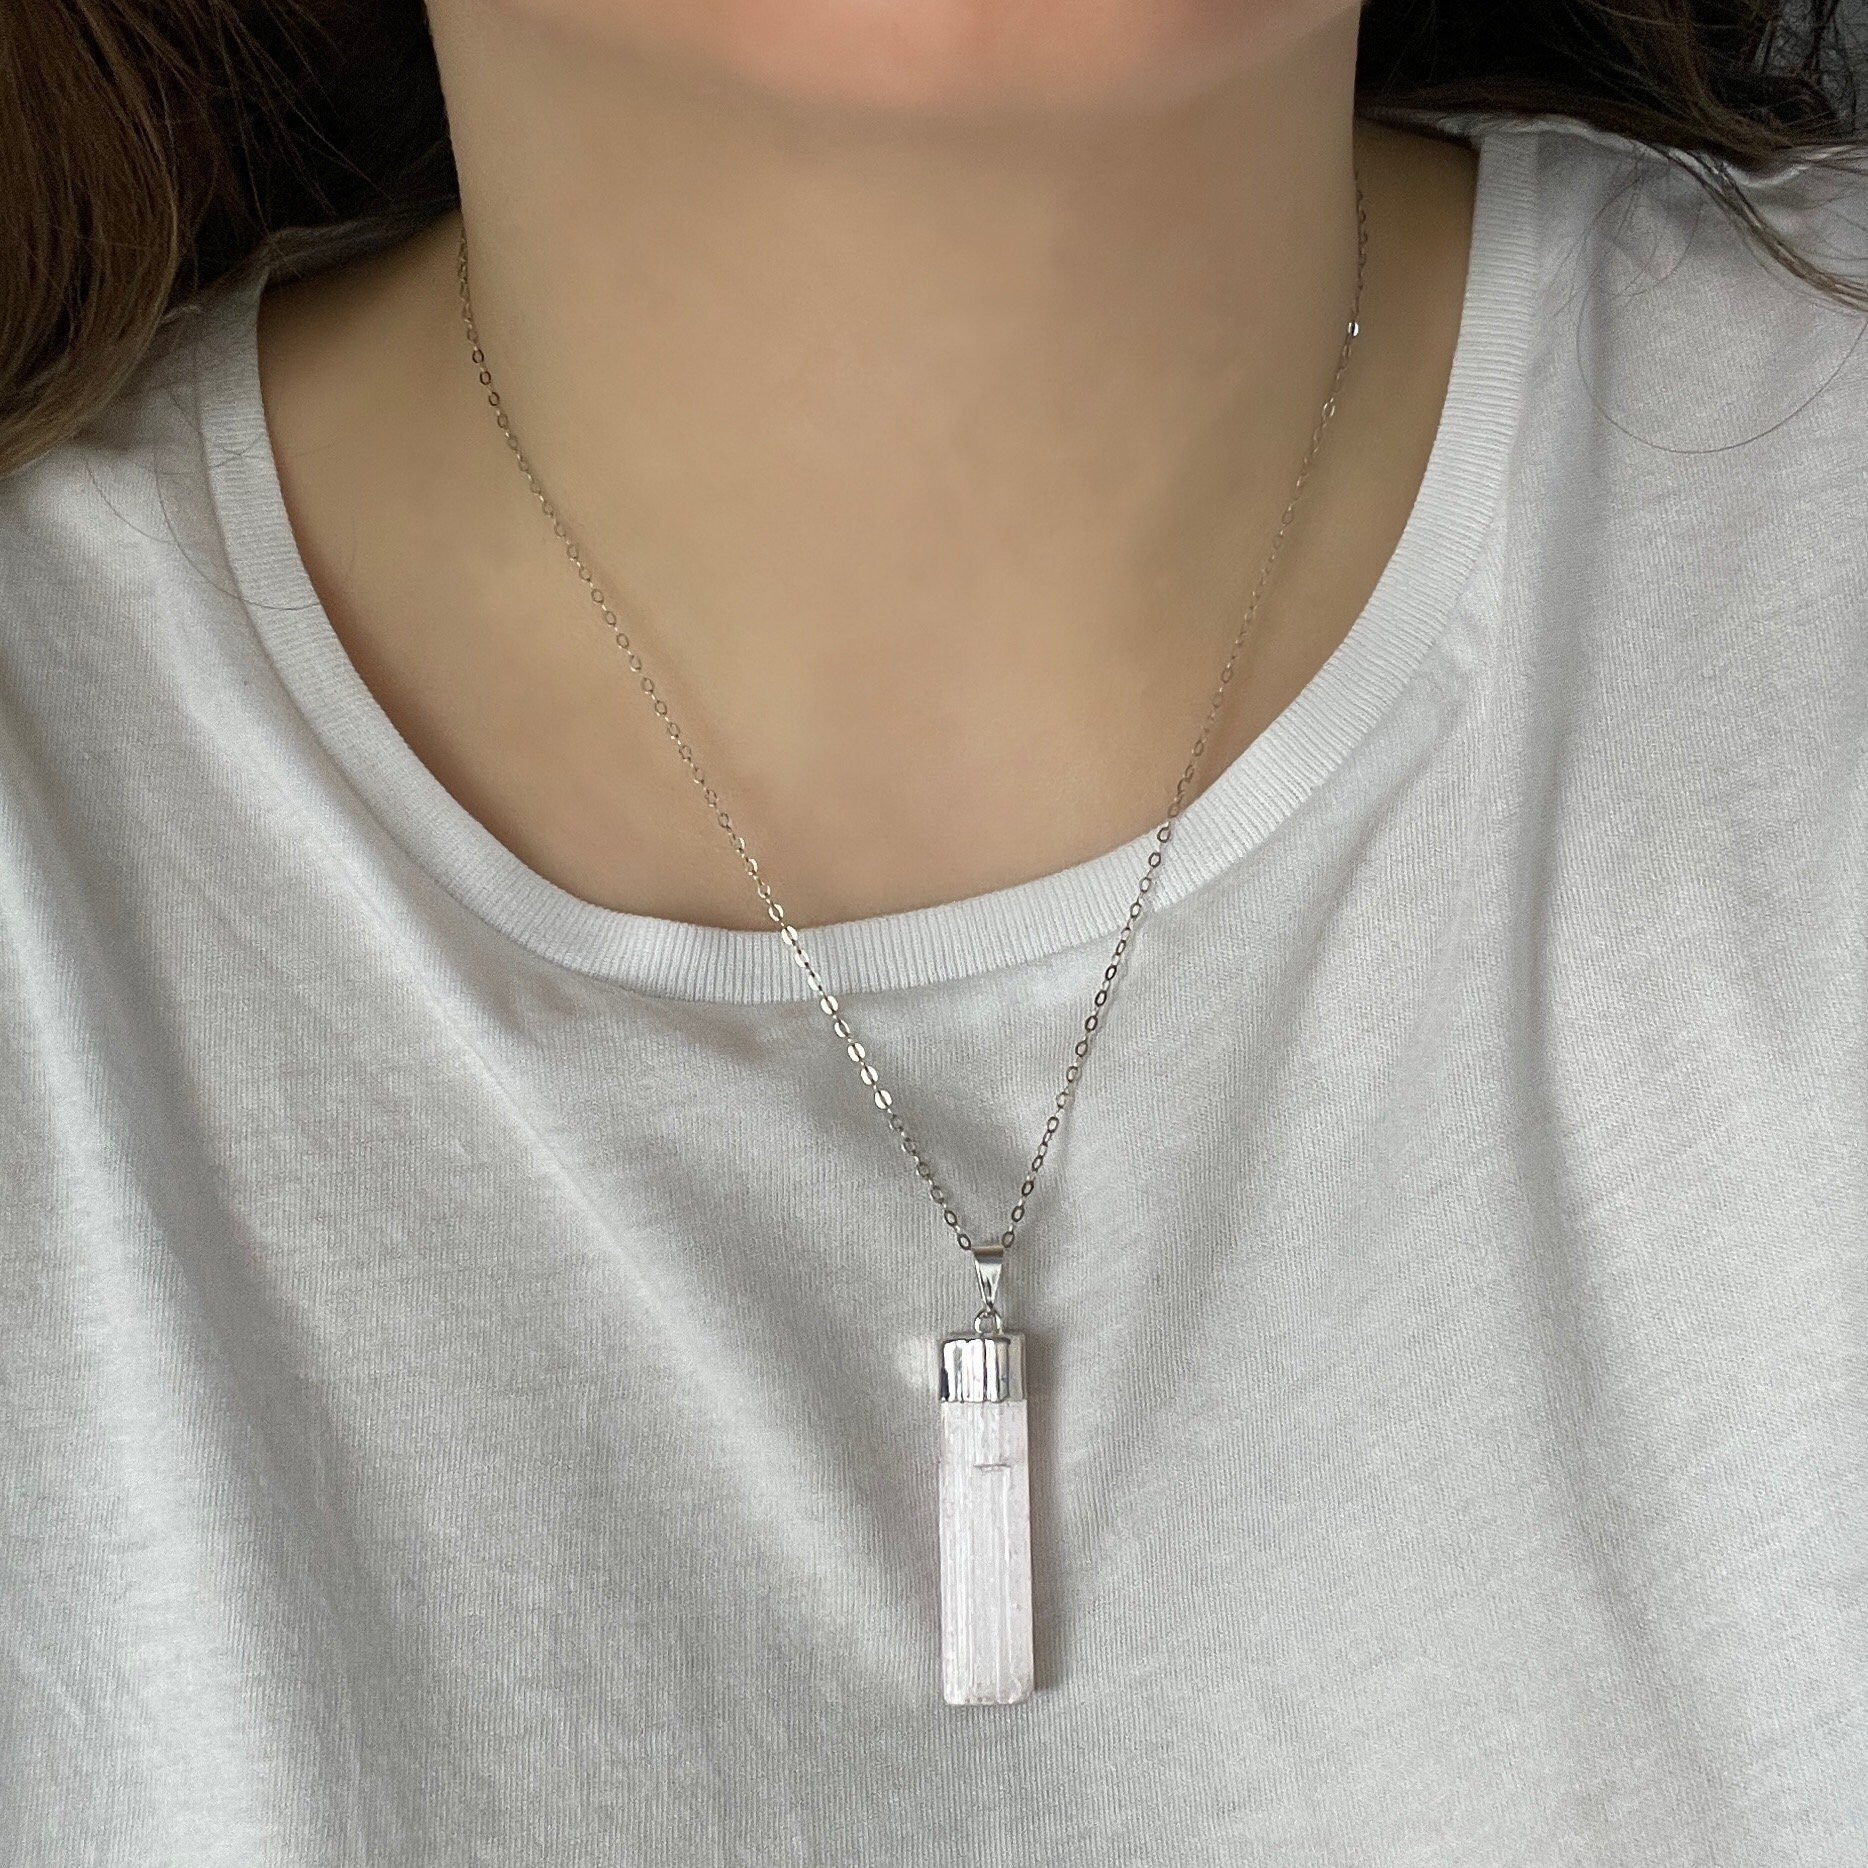 Healing Crystals, Pink Selenite Necklace Silver, Raw Selenite Pendant Necklace, Boho Calming Stone, Gift For Best Friend, G13-543